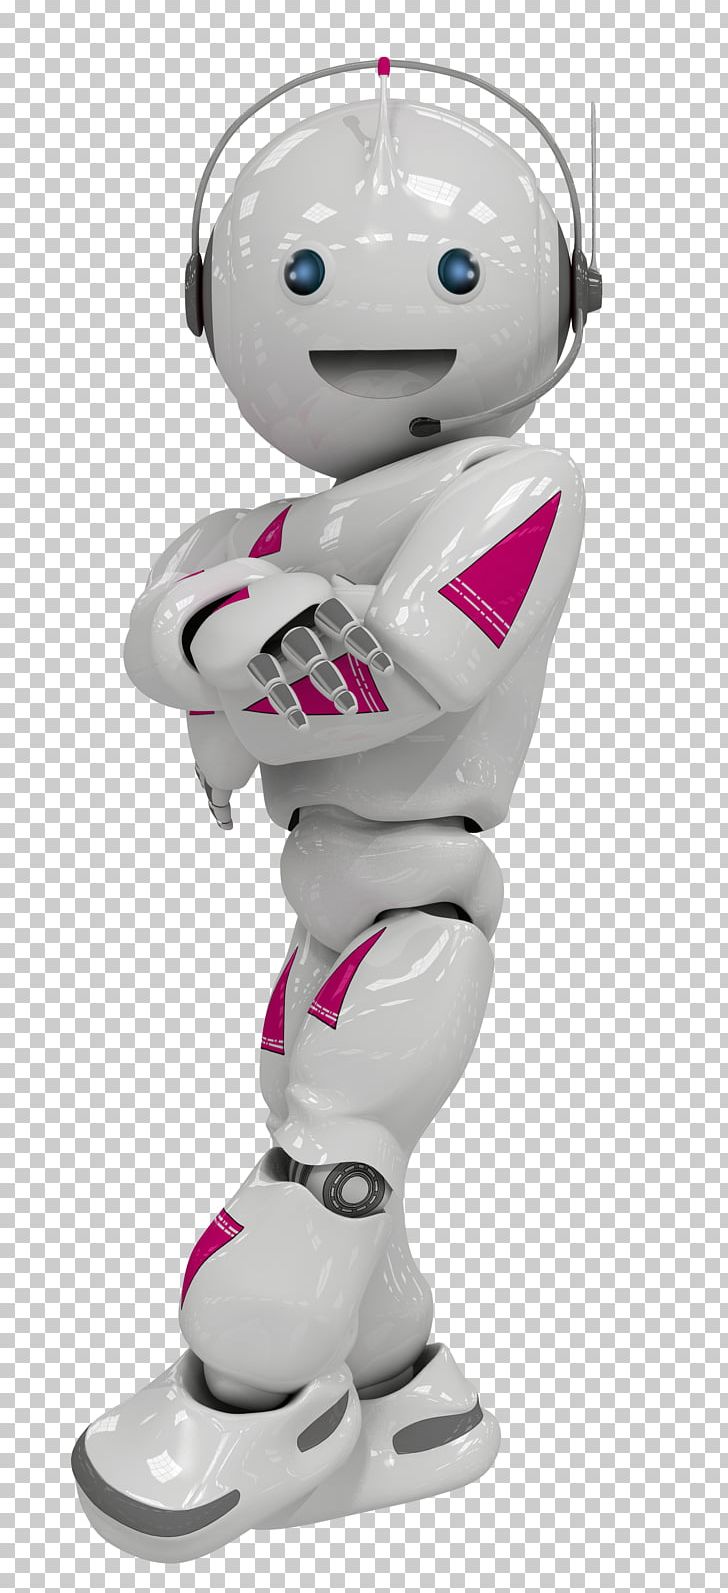 Robot Figurine PNG, Clipart, Electronics, Figurine, Robot, Softy, Sport Free PNG Download